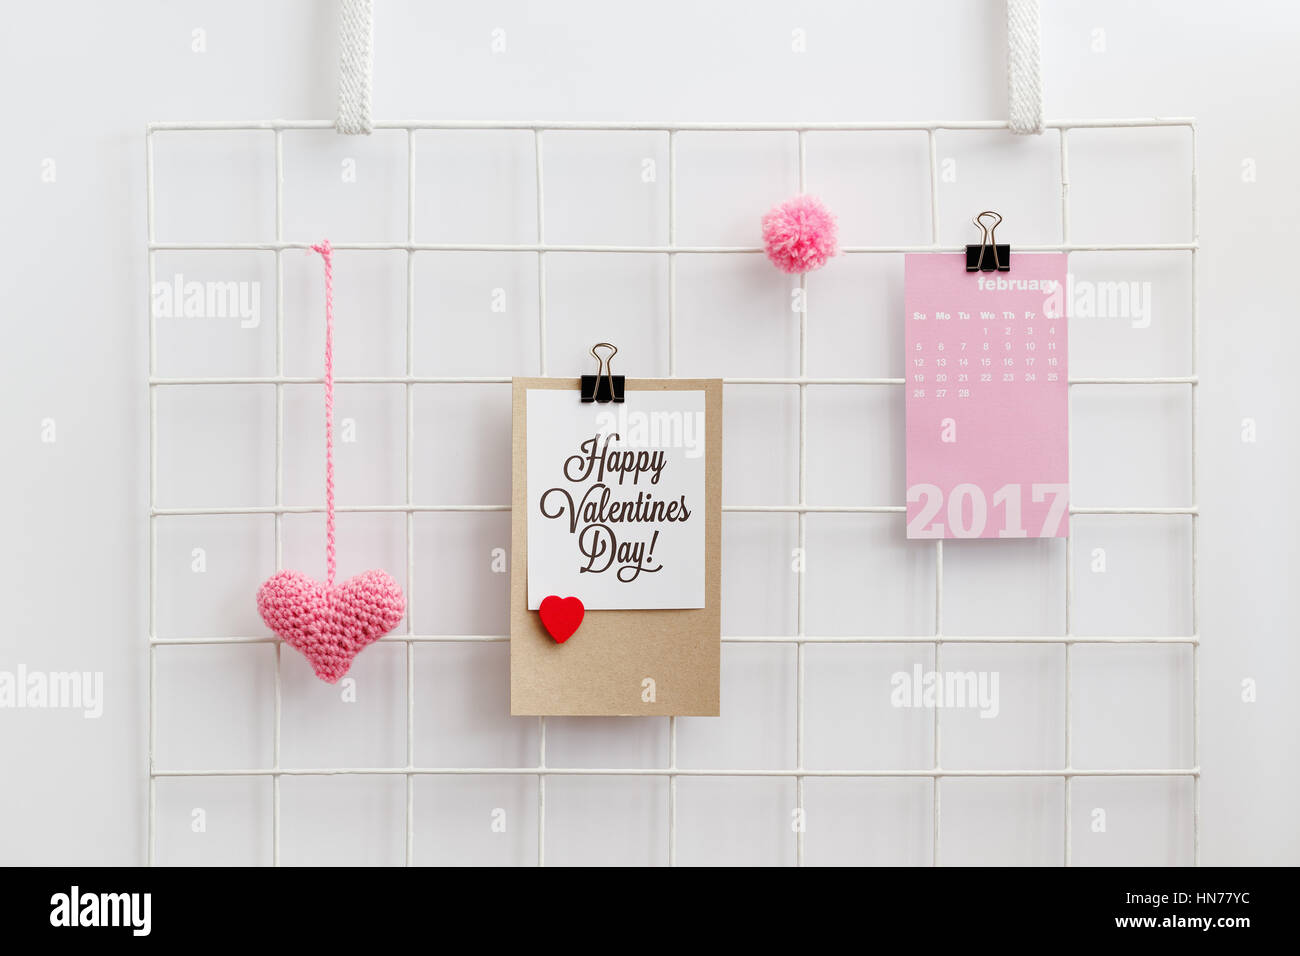 Happy Valentine's Day card on a metal grid display with knitted pink heart and pom pom. Valentine's Day decoration. Wall grid organizer. Stock Photo